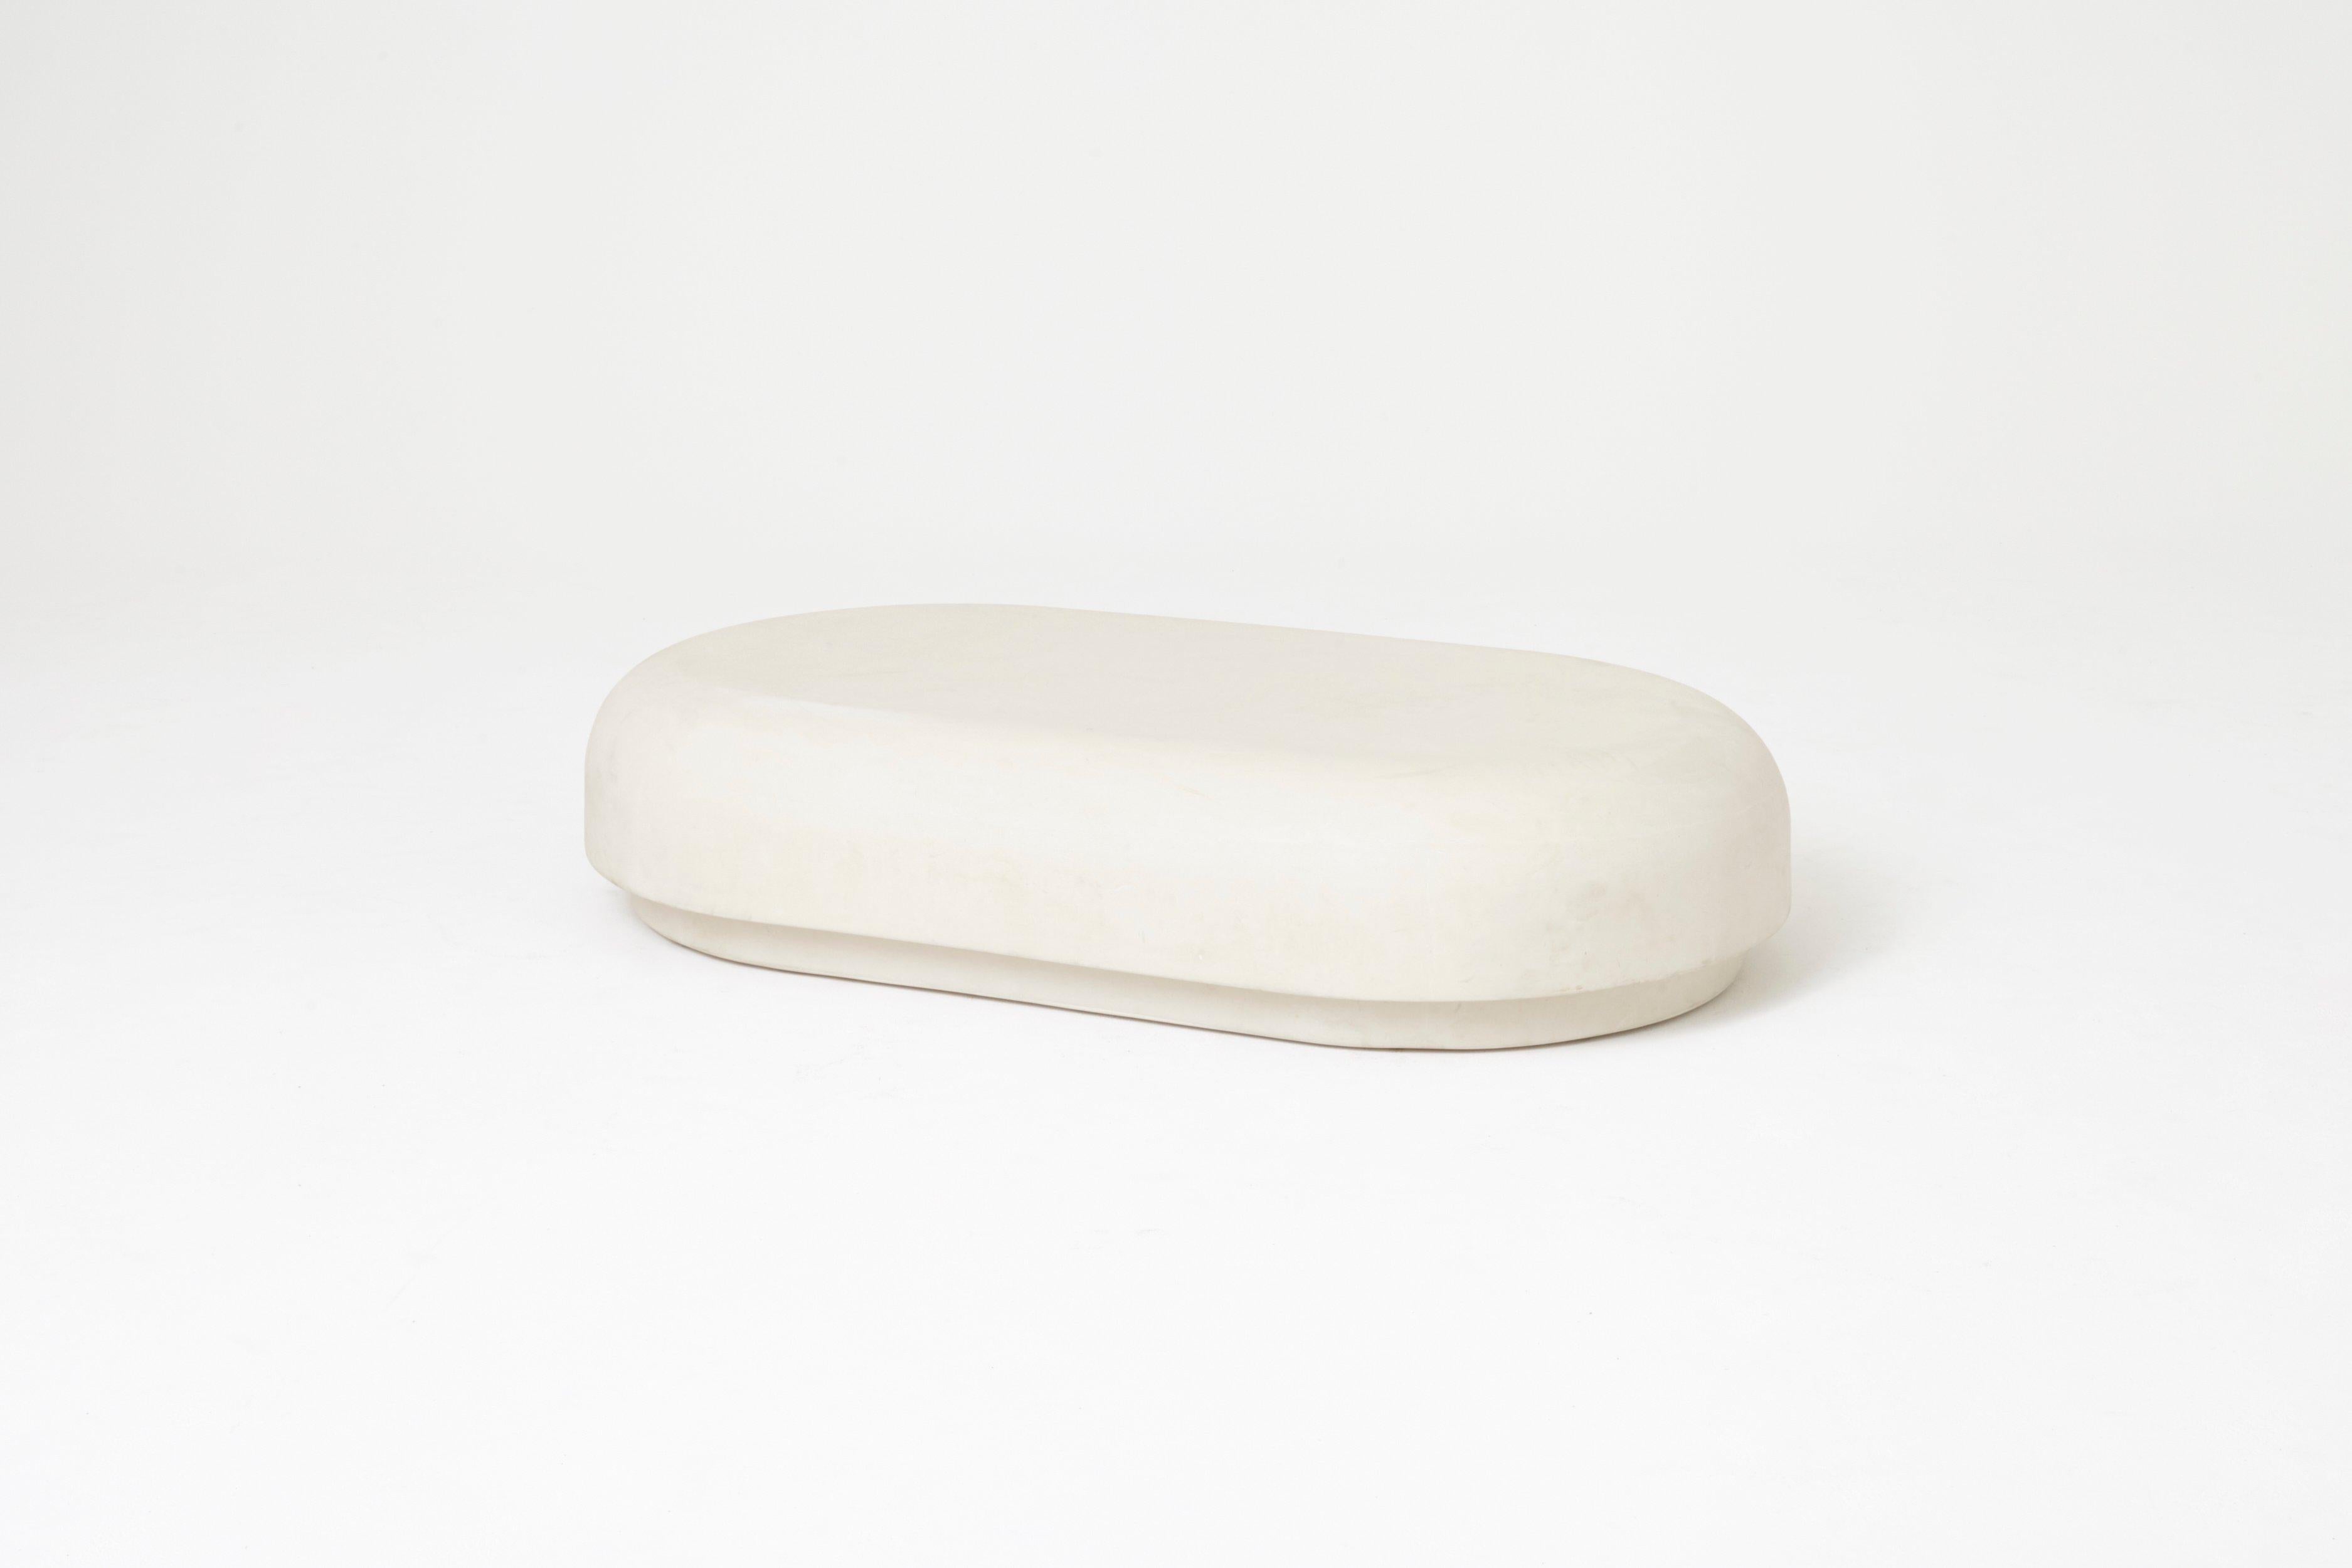 Sealed reinforced plaster
Measure: 30(H) x 85(D) x 150(W) cm
30 kg
A low coffee table, with the
reassuring curvaceousness of the
Roly-Poly collection. The rounded
form is cast in plaster, sealed and
reinforced for increased durability.